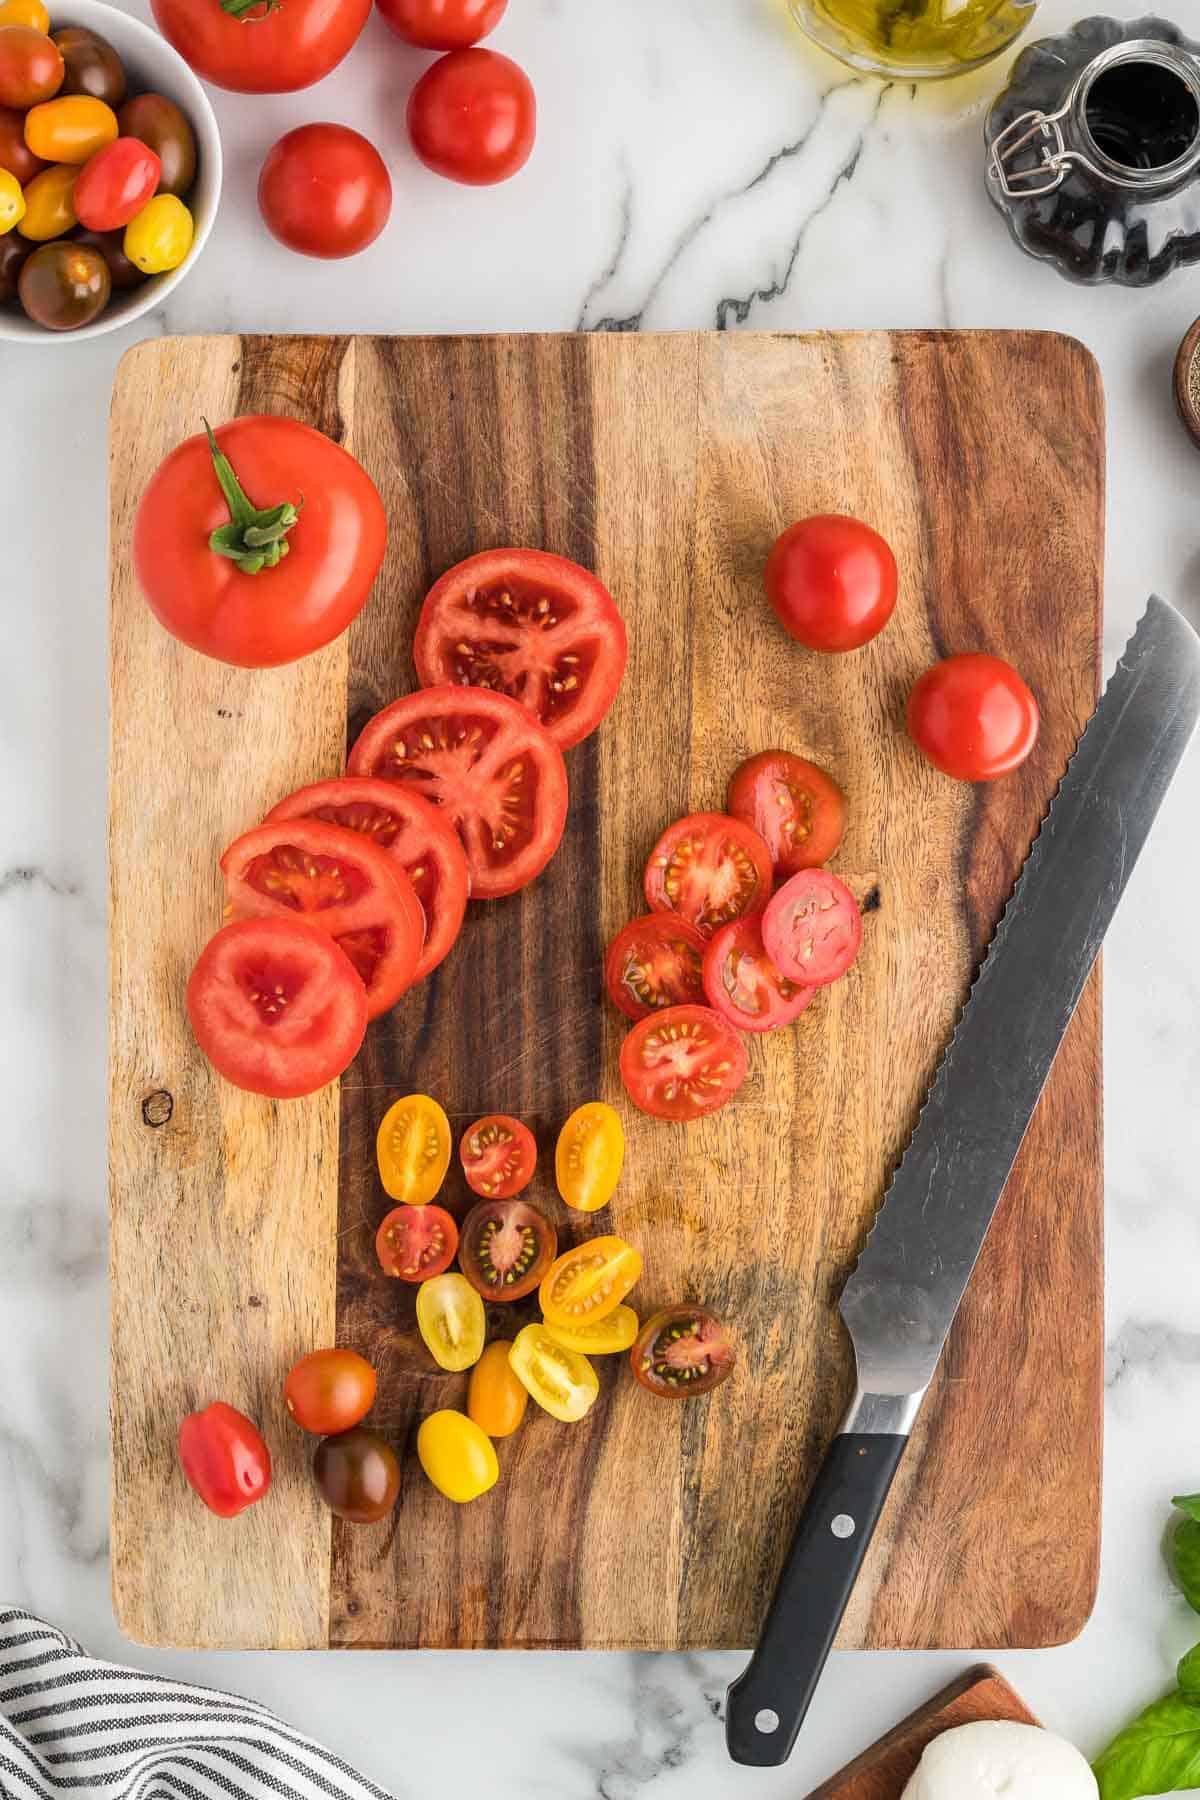 Sliced tomatoes on a wooden cutting board.